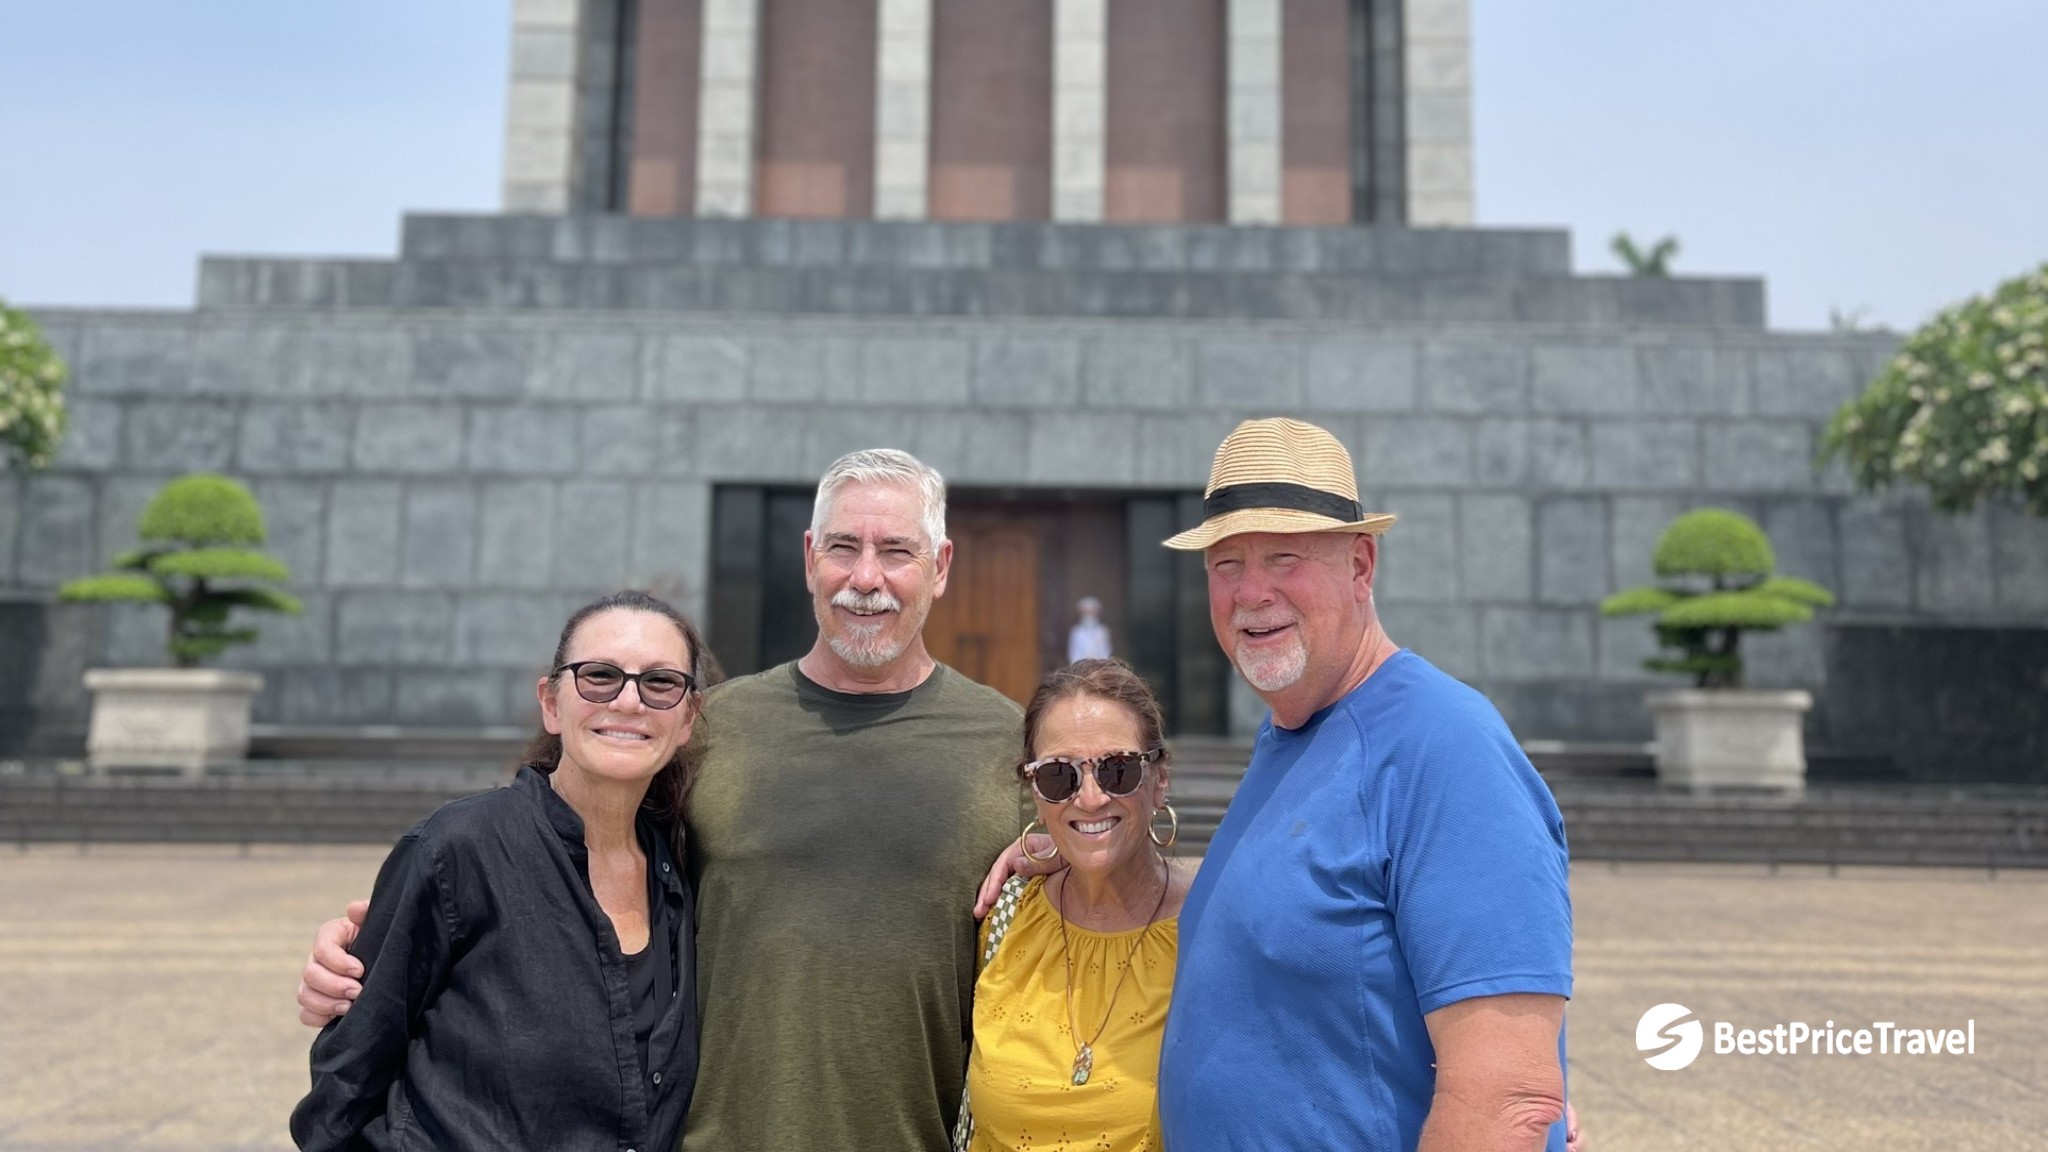 Day 2 Ho Chi Minh Mausoleum Is Really Famous To Foreigners